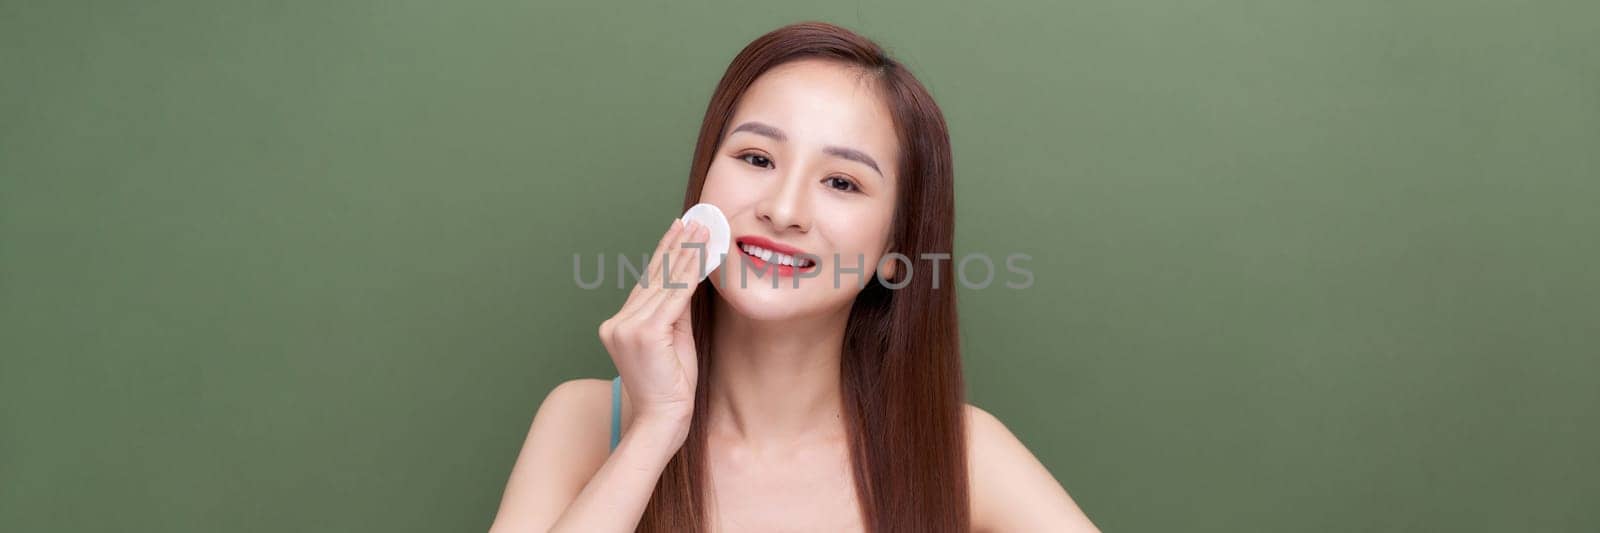 Girl applying lotion using cotton pad over green background, panorama, crop